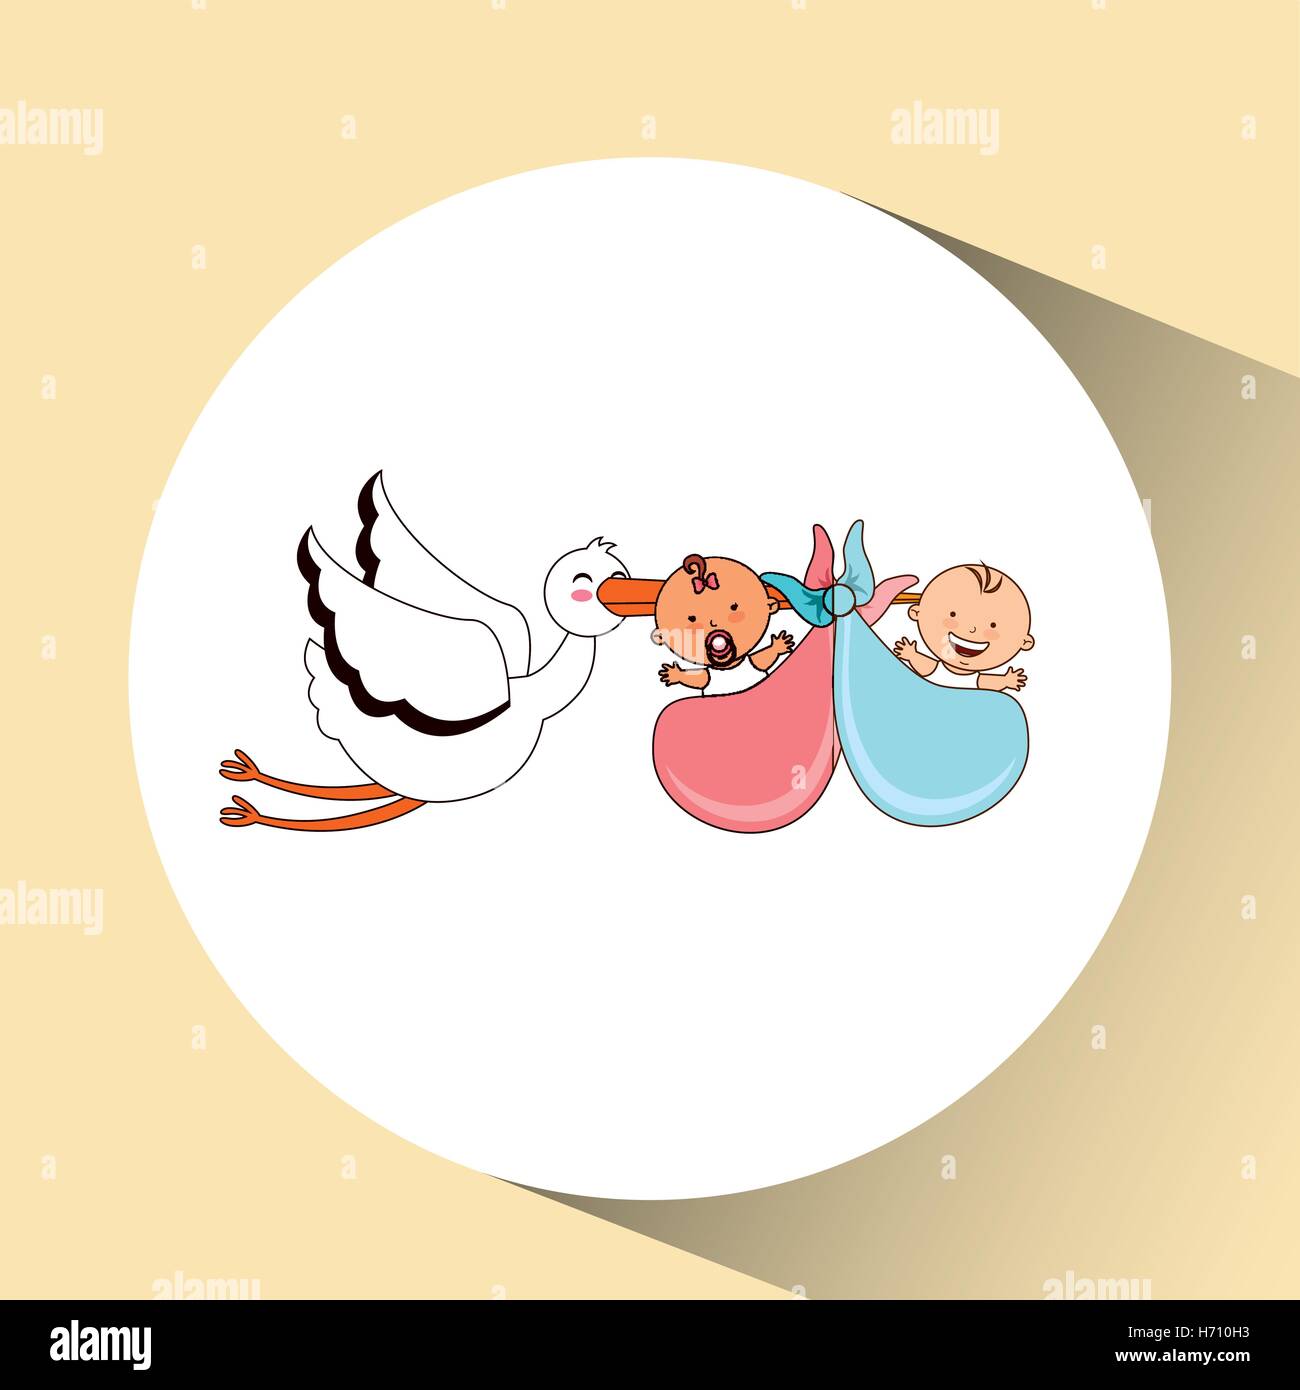 Twins by girl boy Stock Vector Images - Page 2 - Alamy